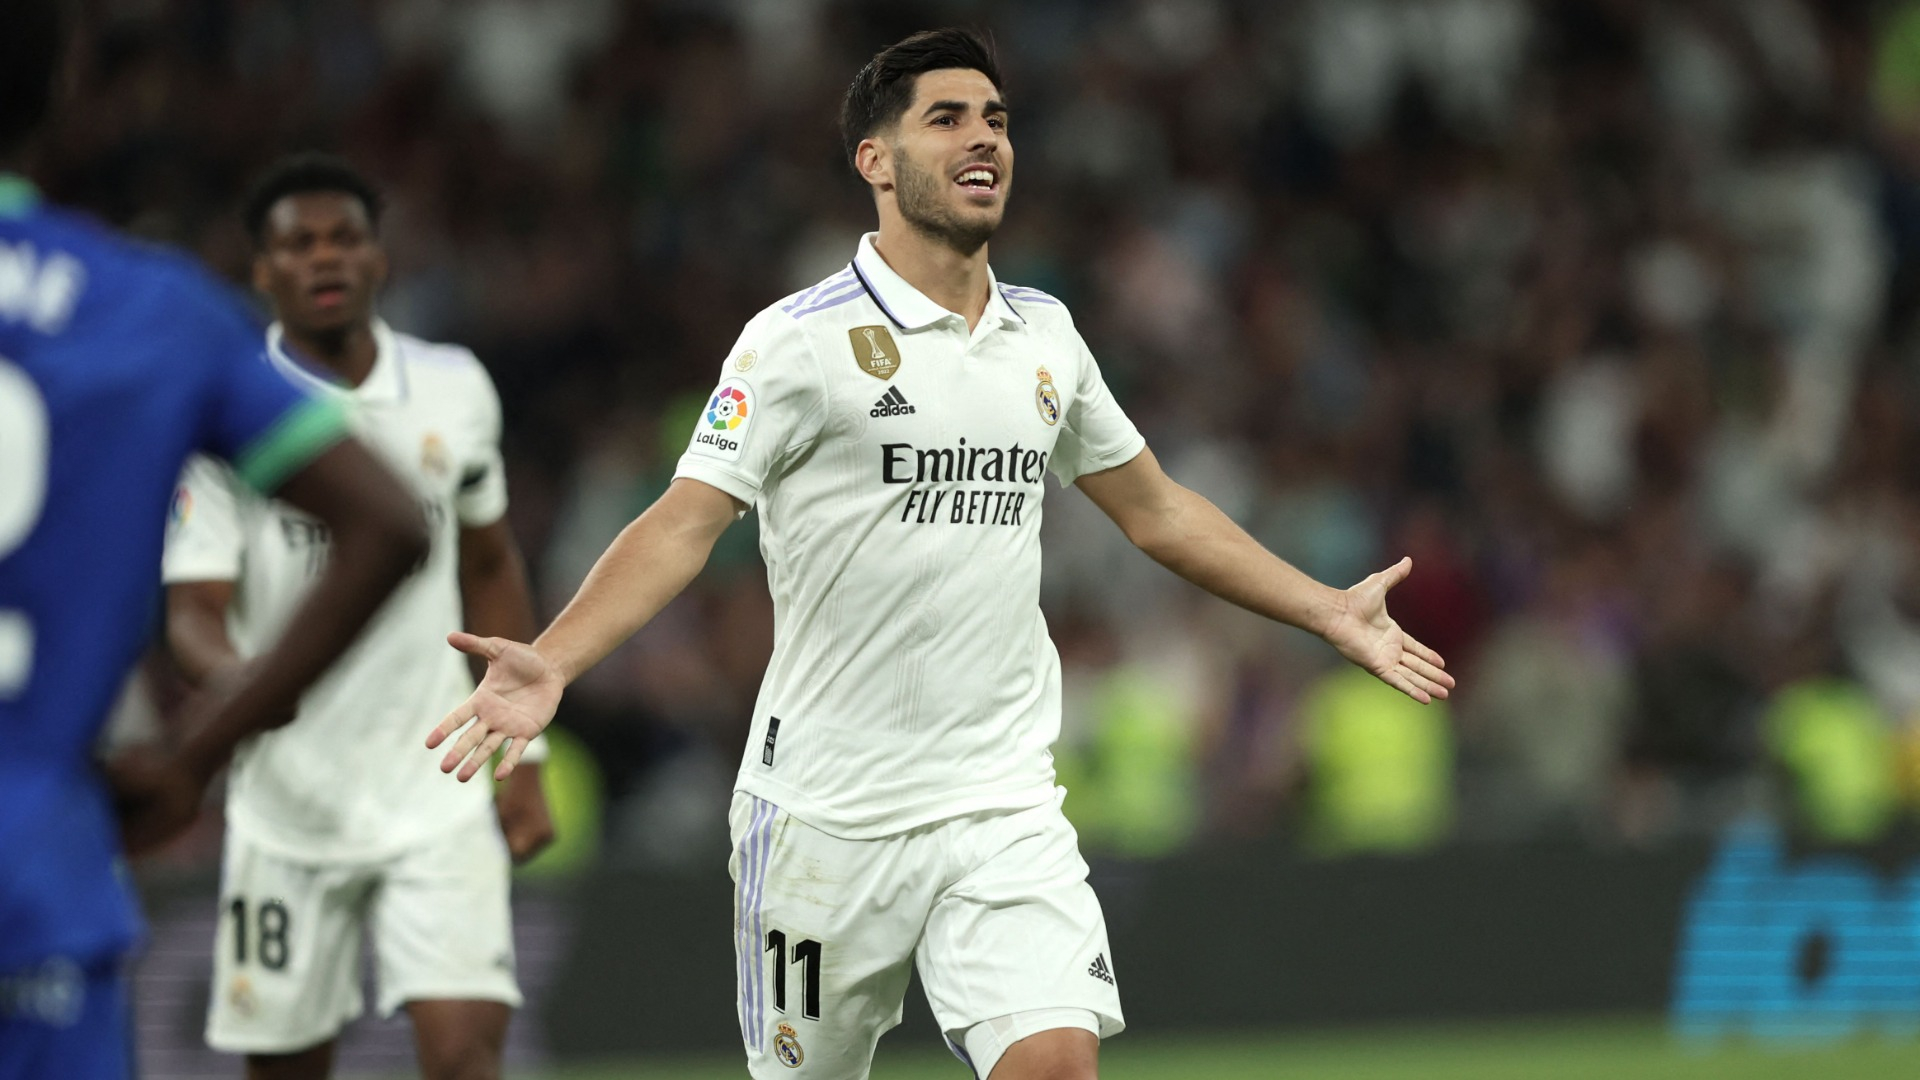 Marco Asensio unveiled as a new PSG player